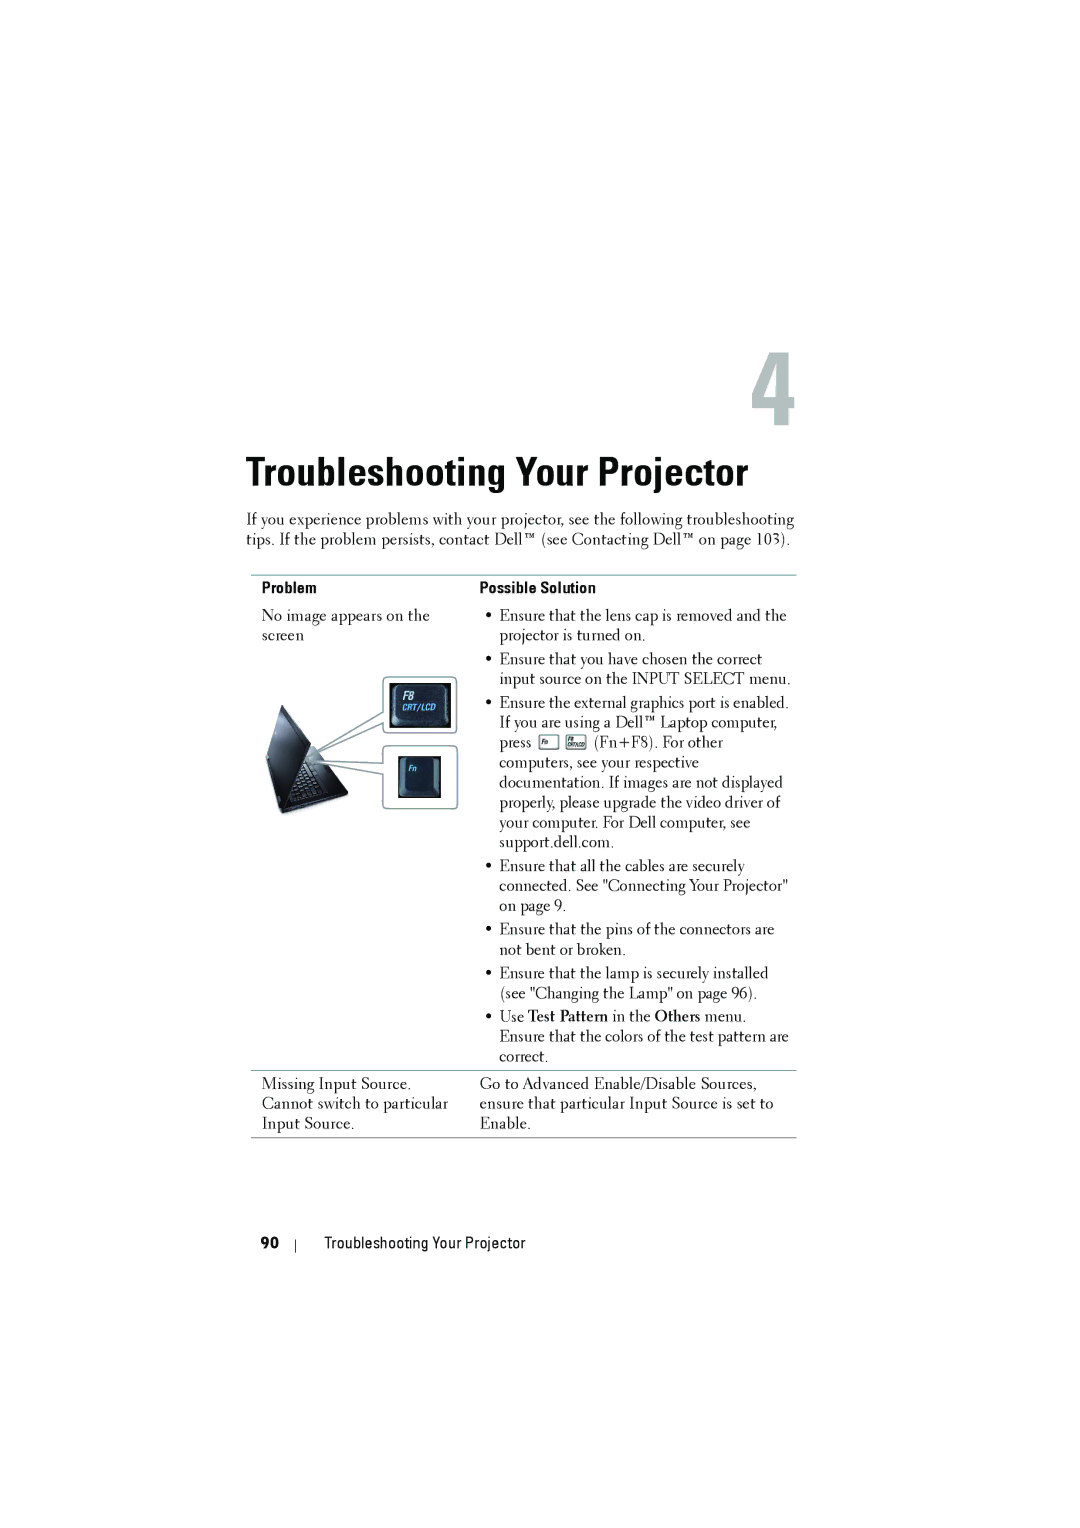 Dell dell projector manual Troubleshooting Your Projector, Use Test Pattern in the Others menu 